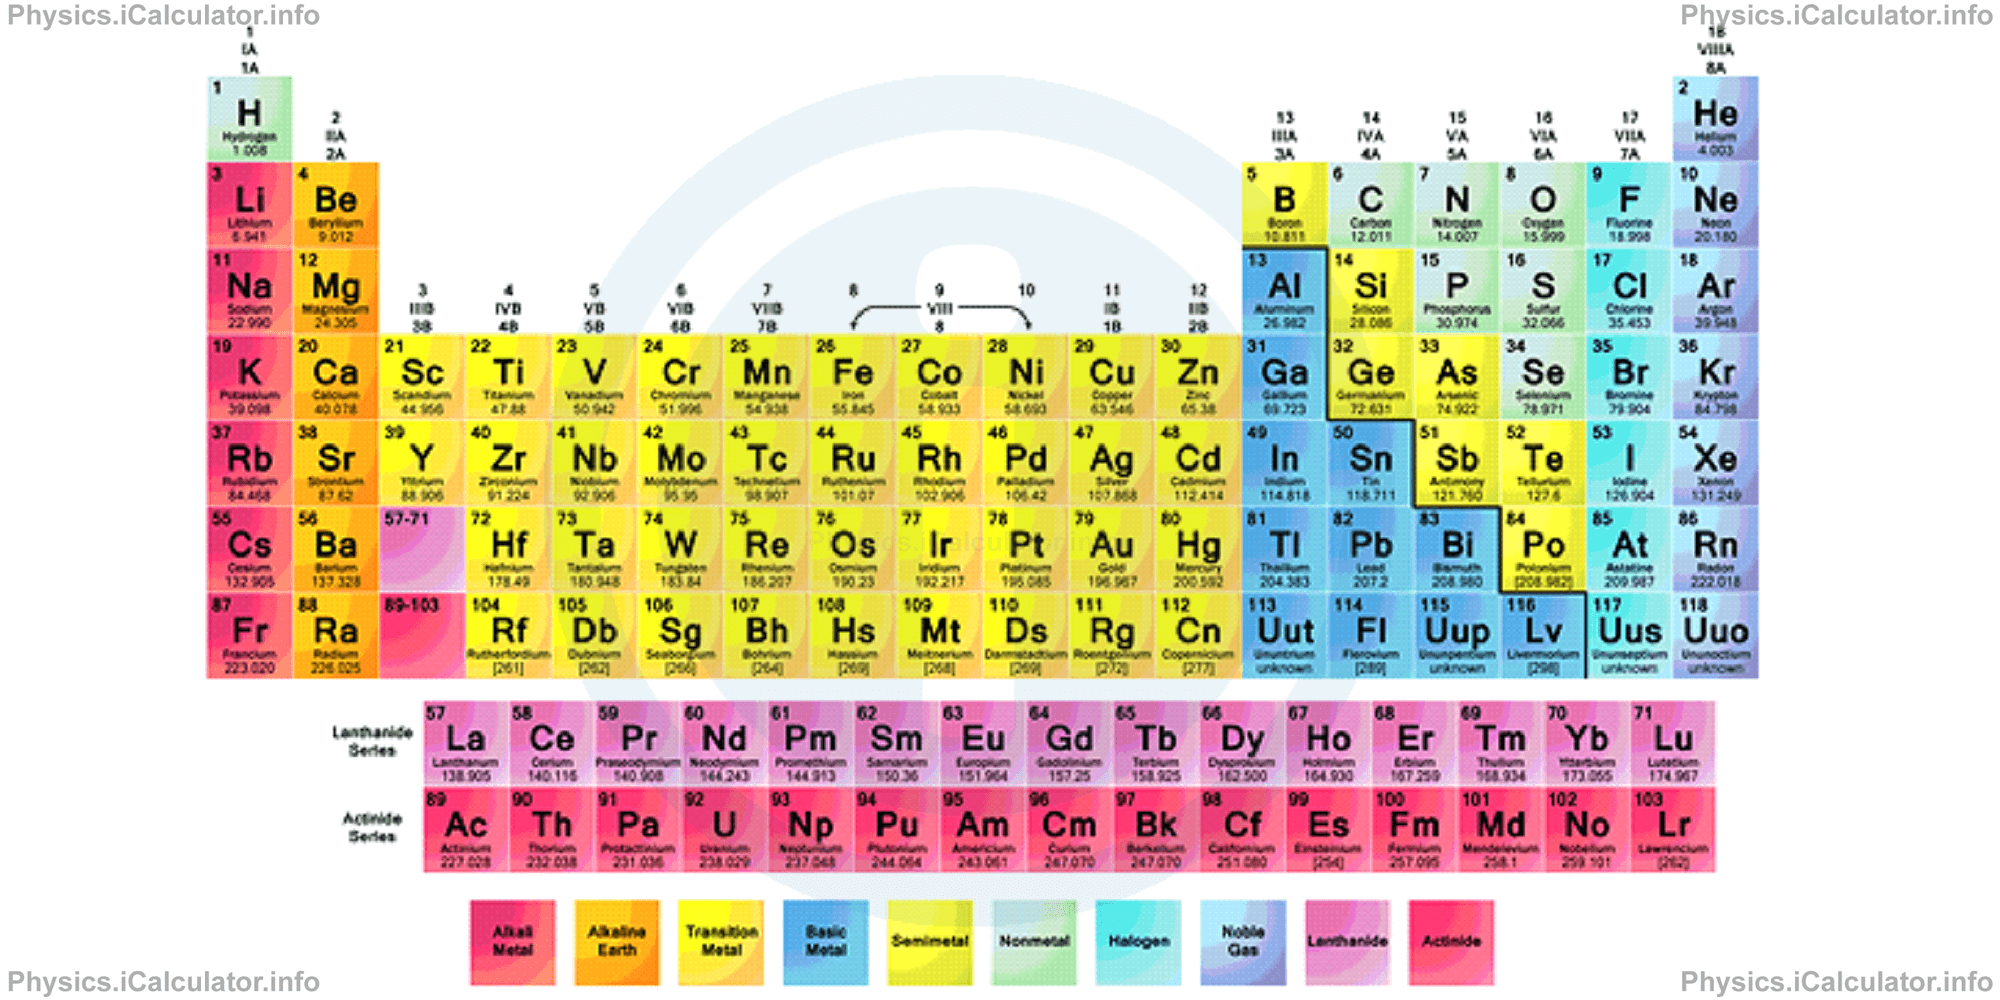 Physics Tutorials: This image provides visual information for the periodic table 